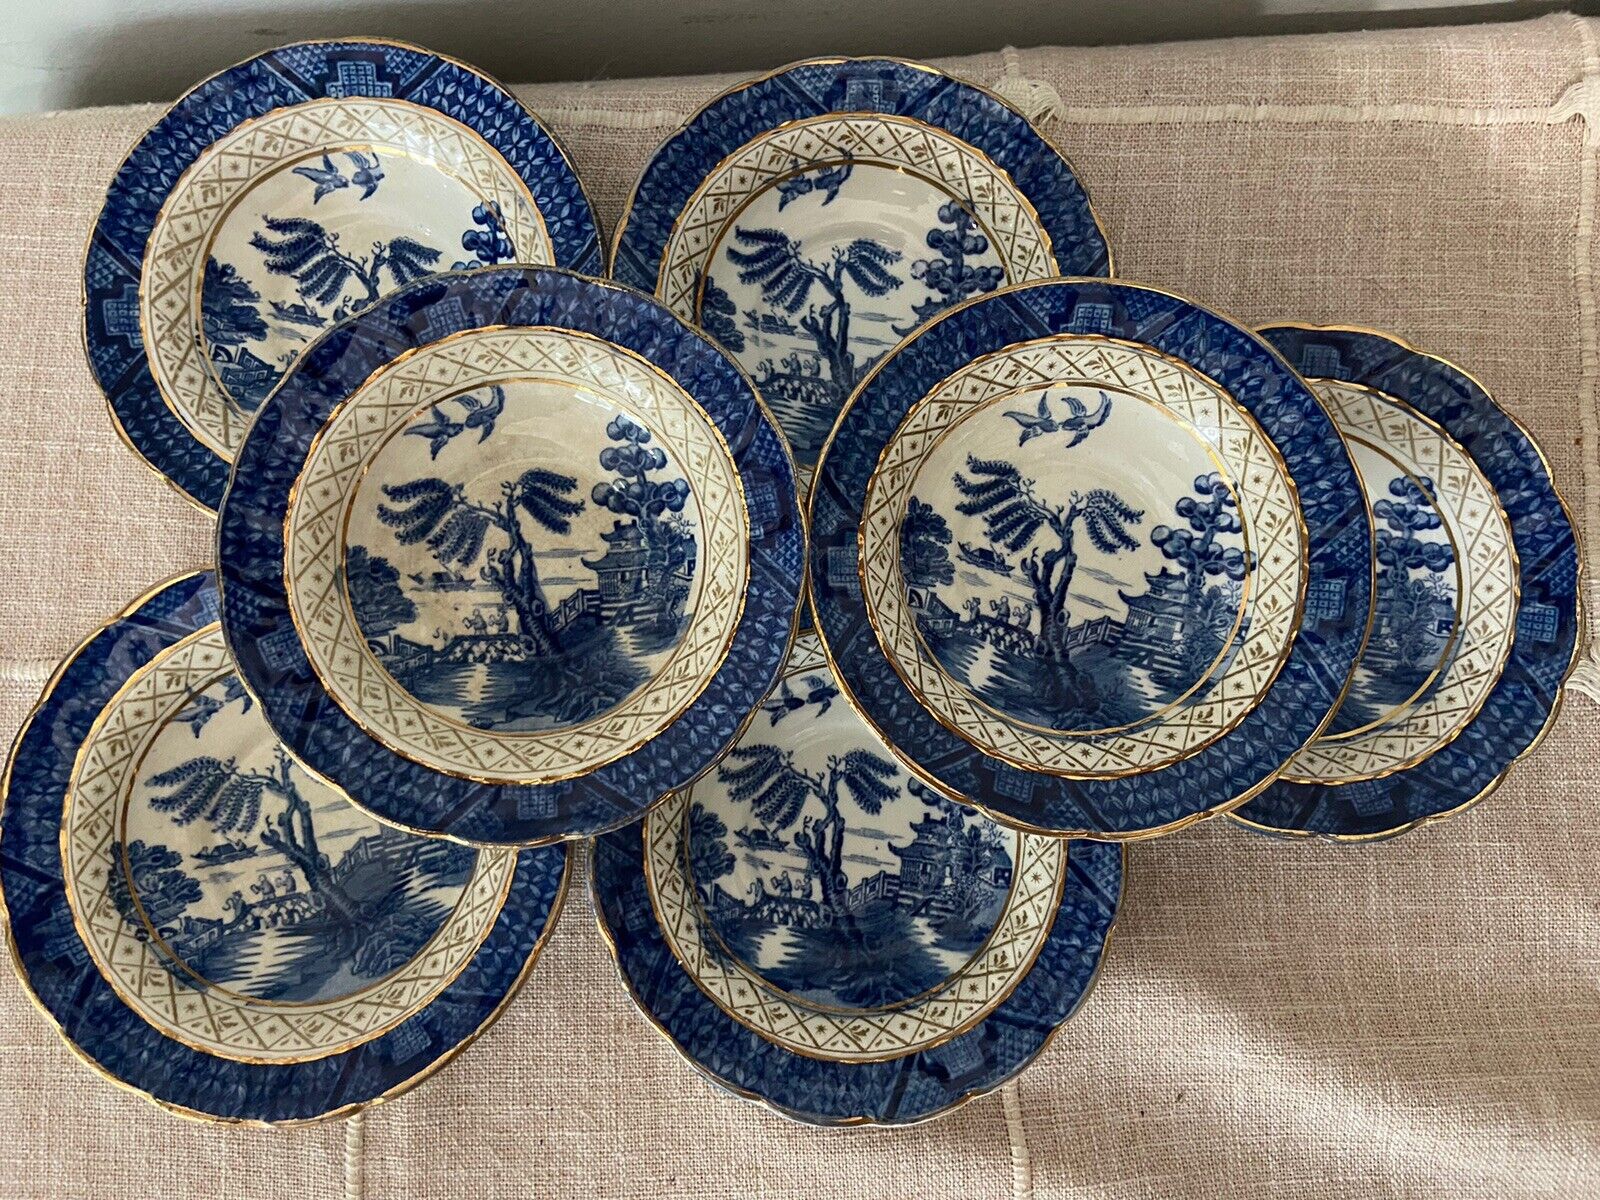 Booths Real Old Willow Saucer Small Plate Bowl A8025